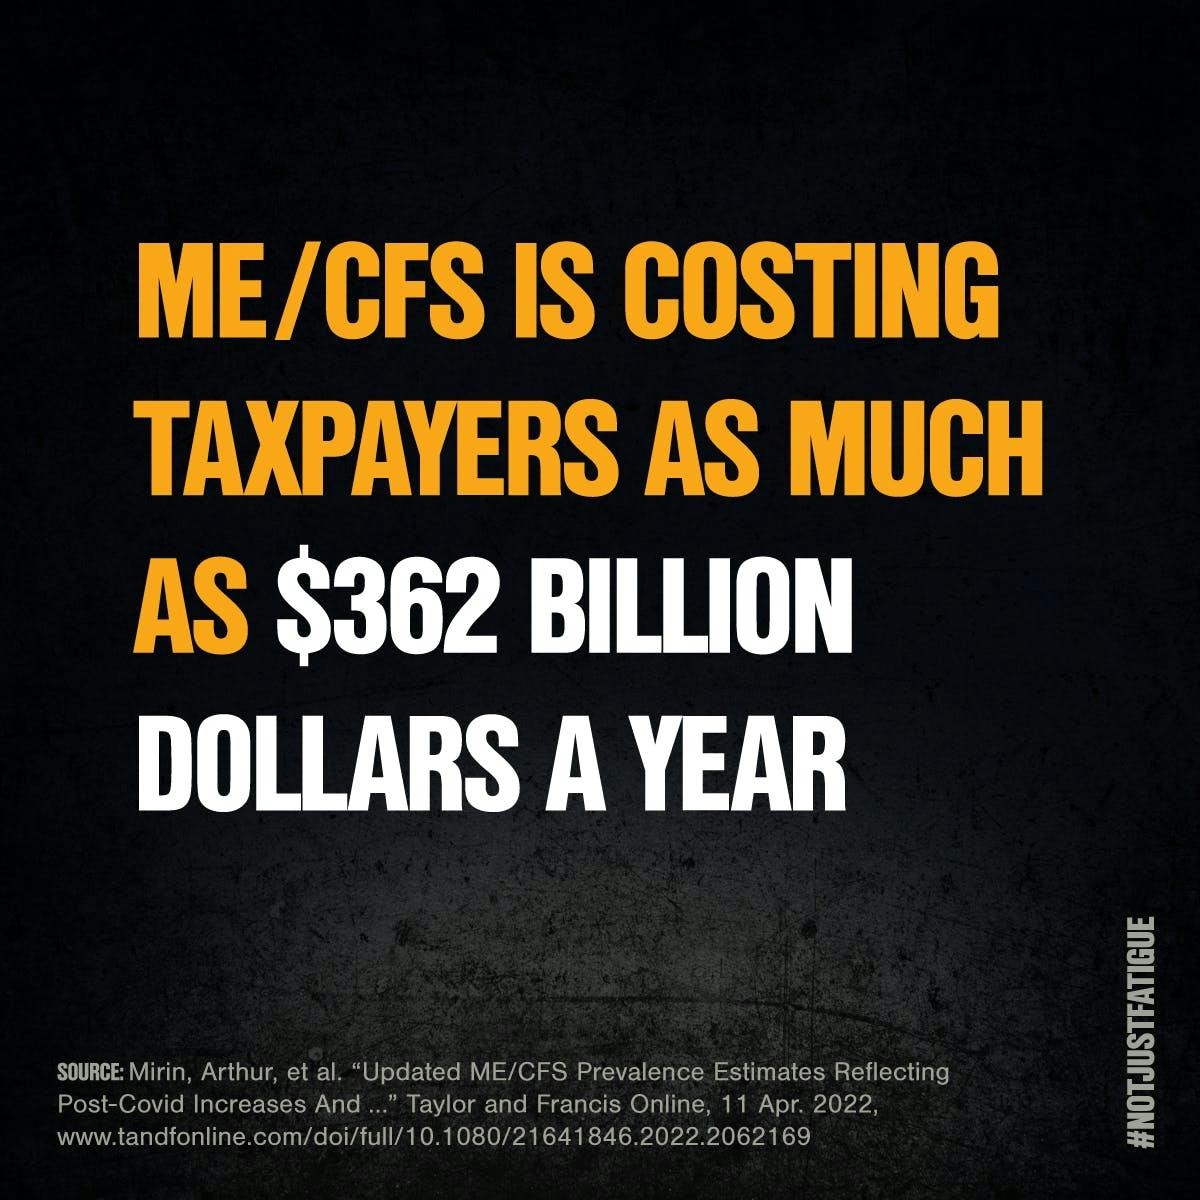 ME/CFS is costing taxpayers as much as $362 billion dollars a year.